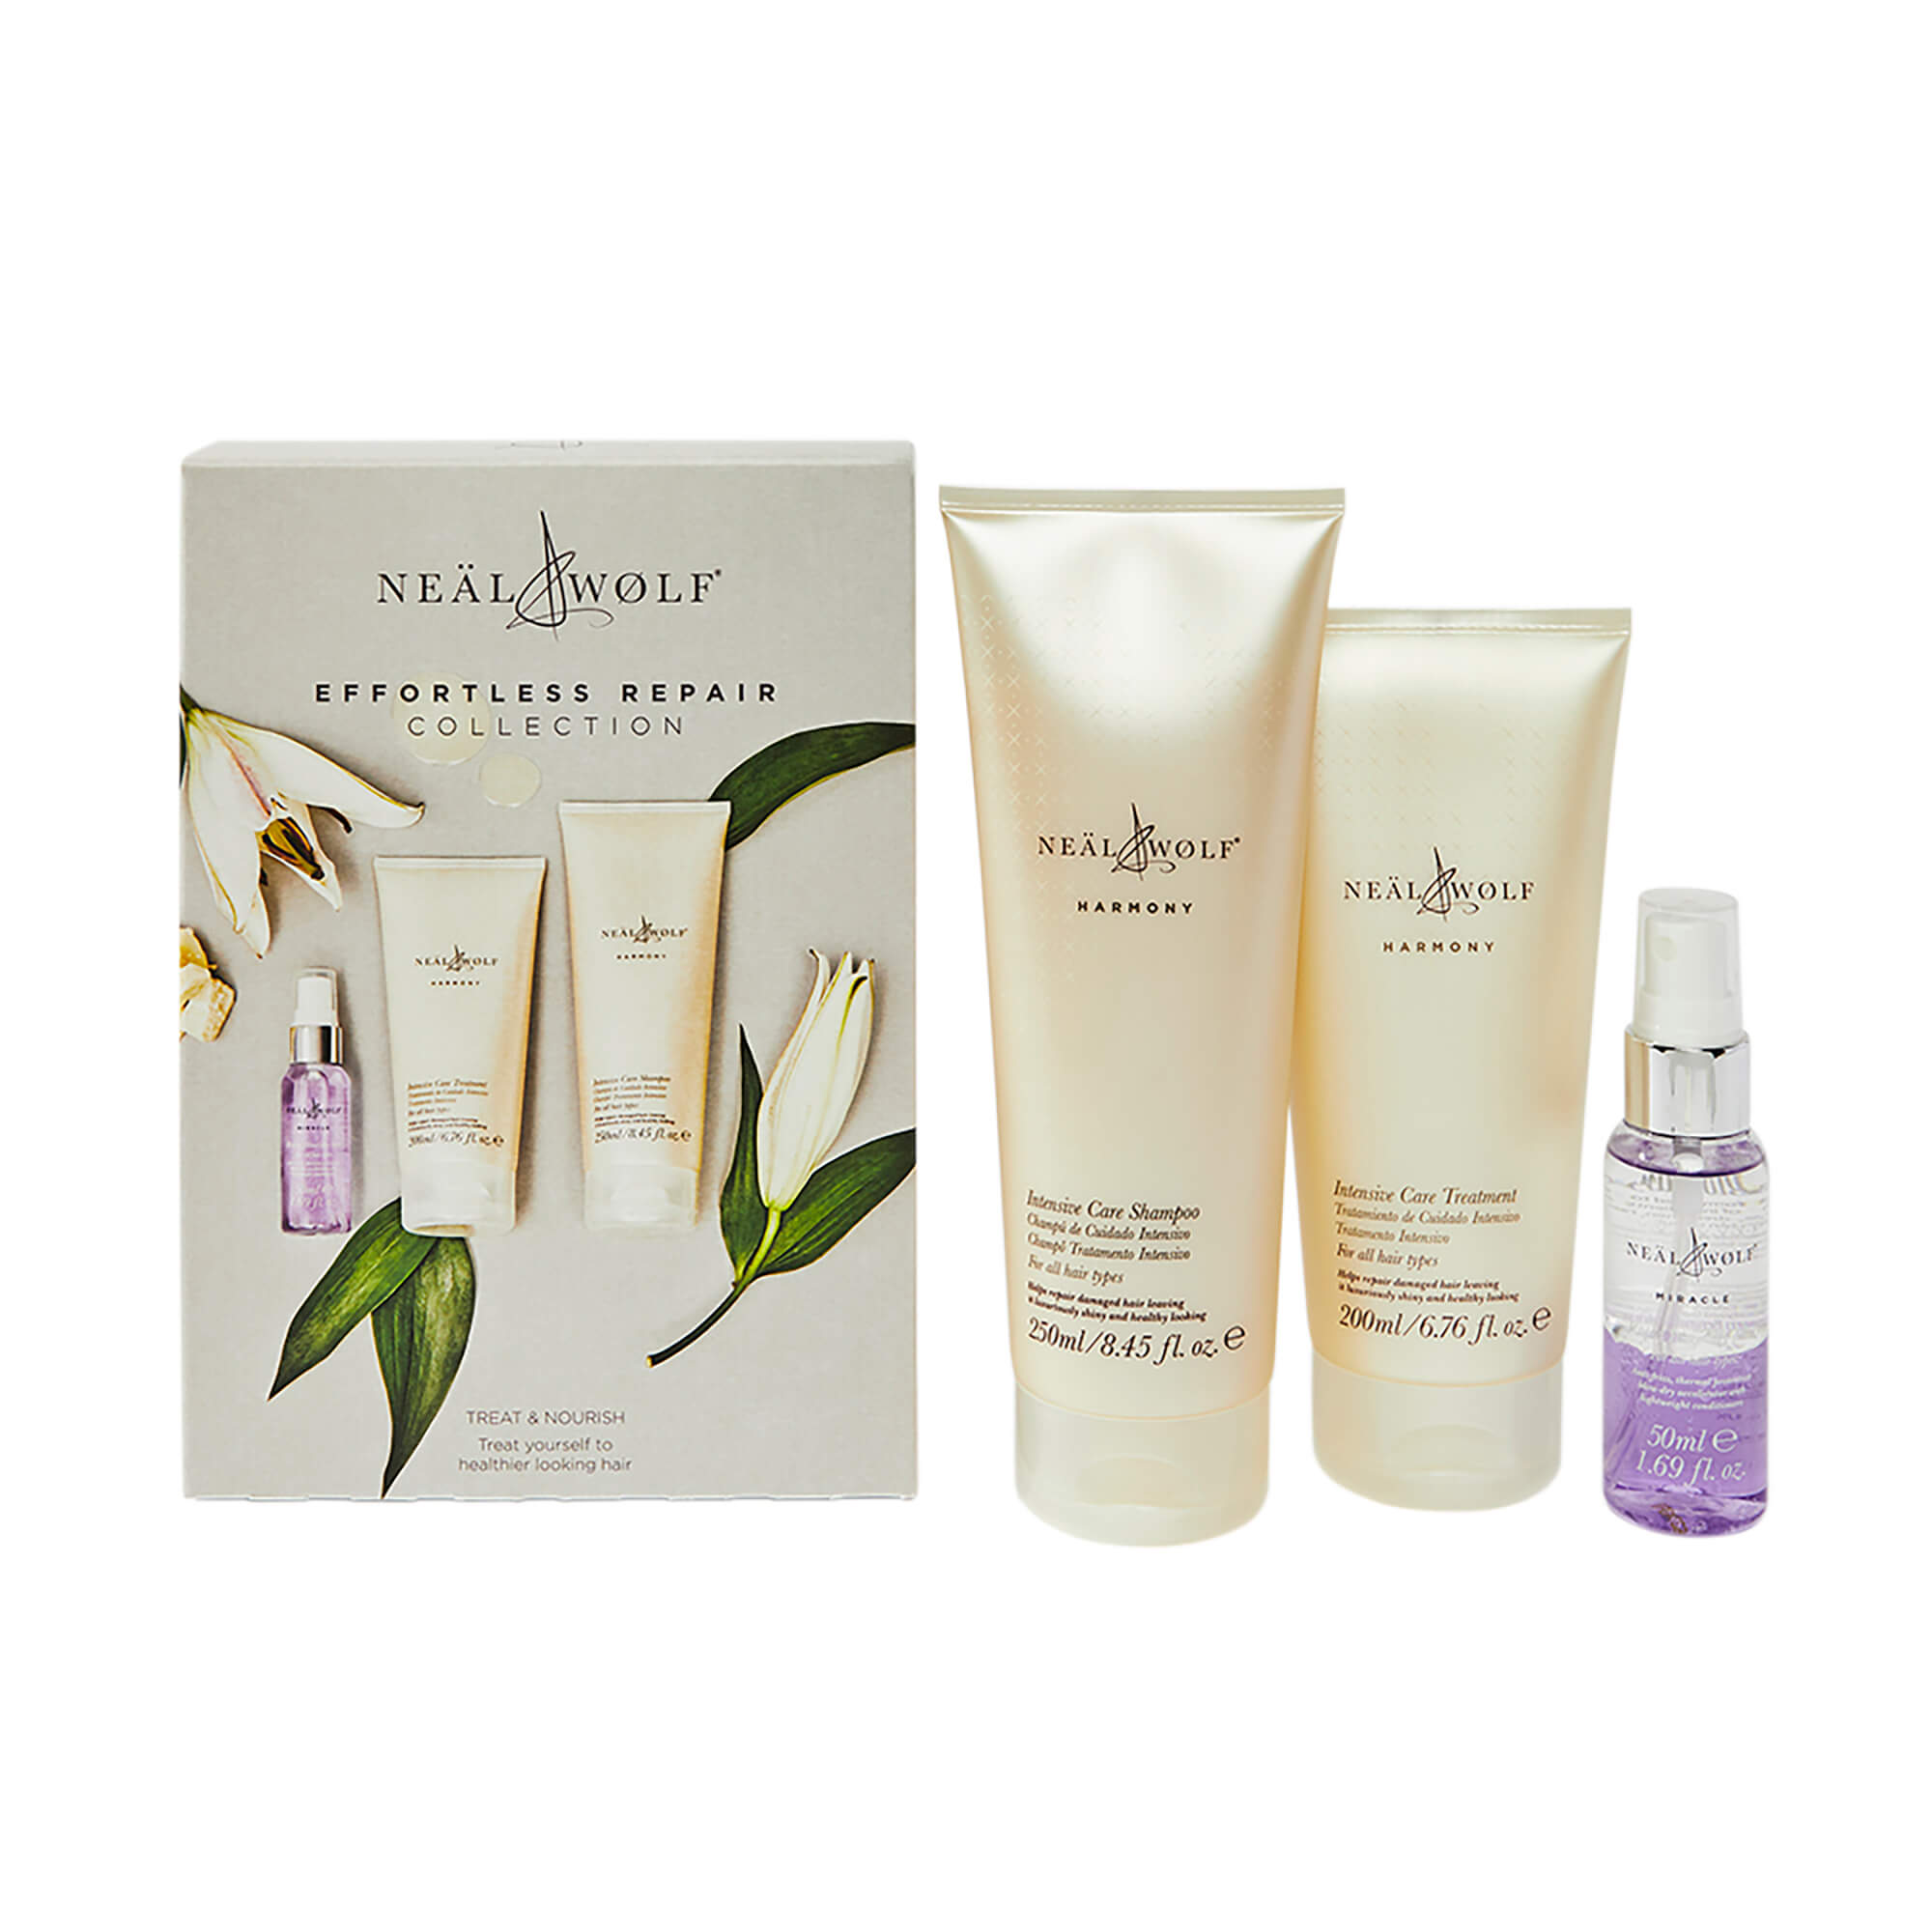 Image of Effortless REPAIR Trio Collection